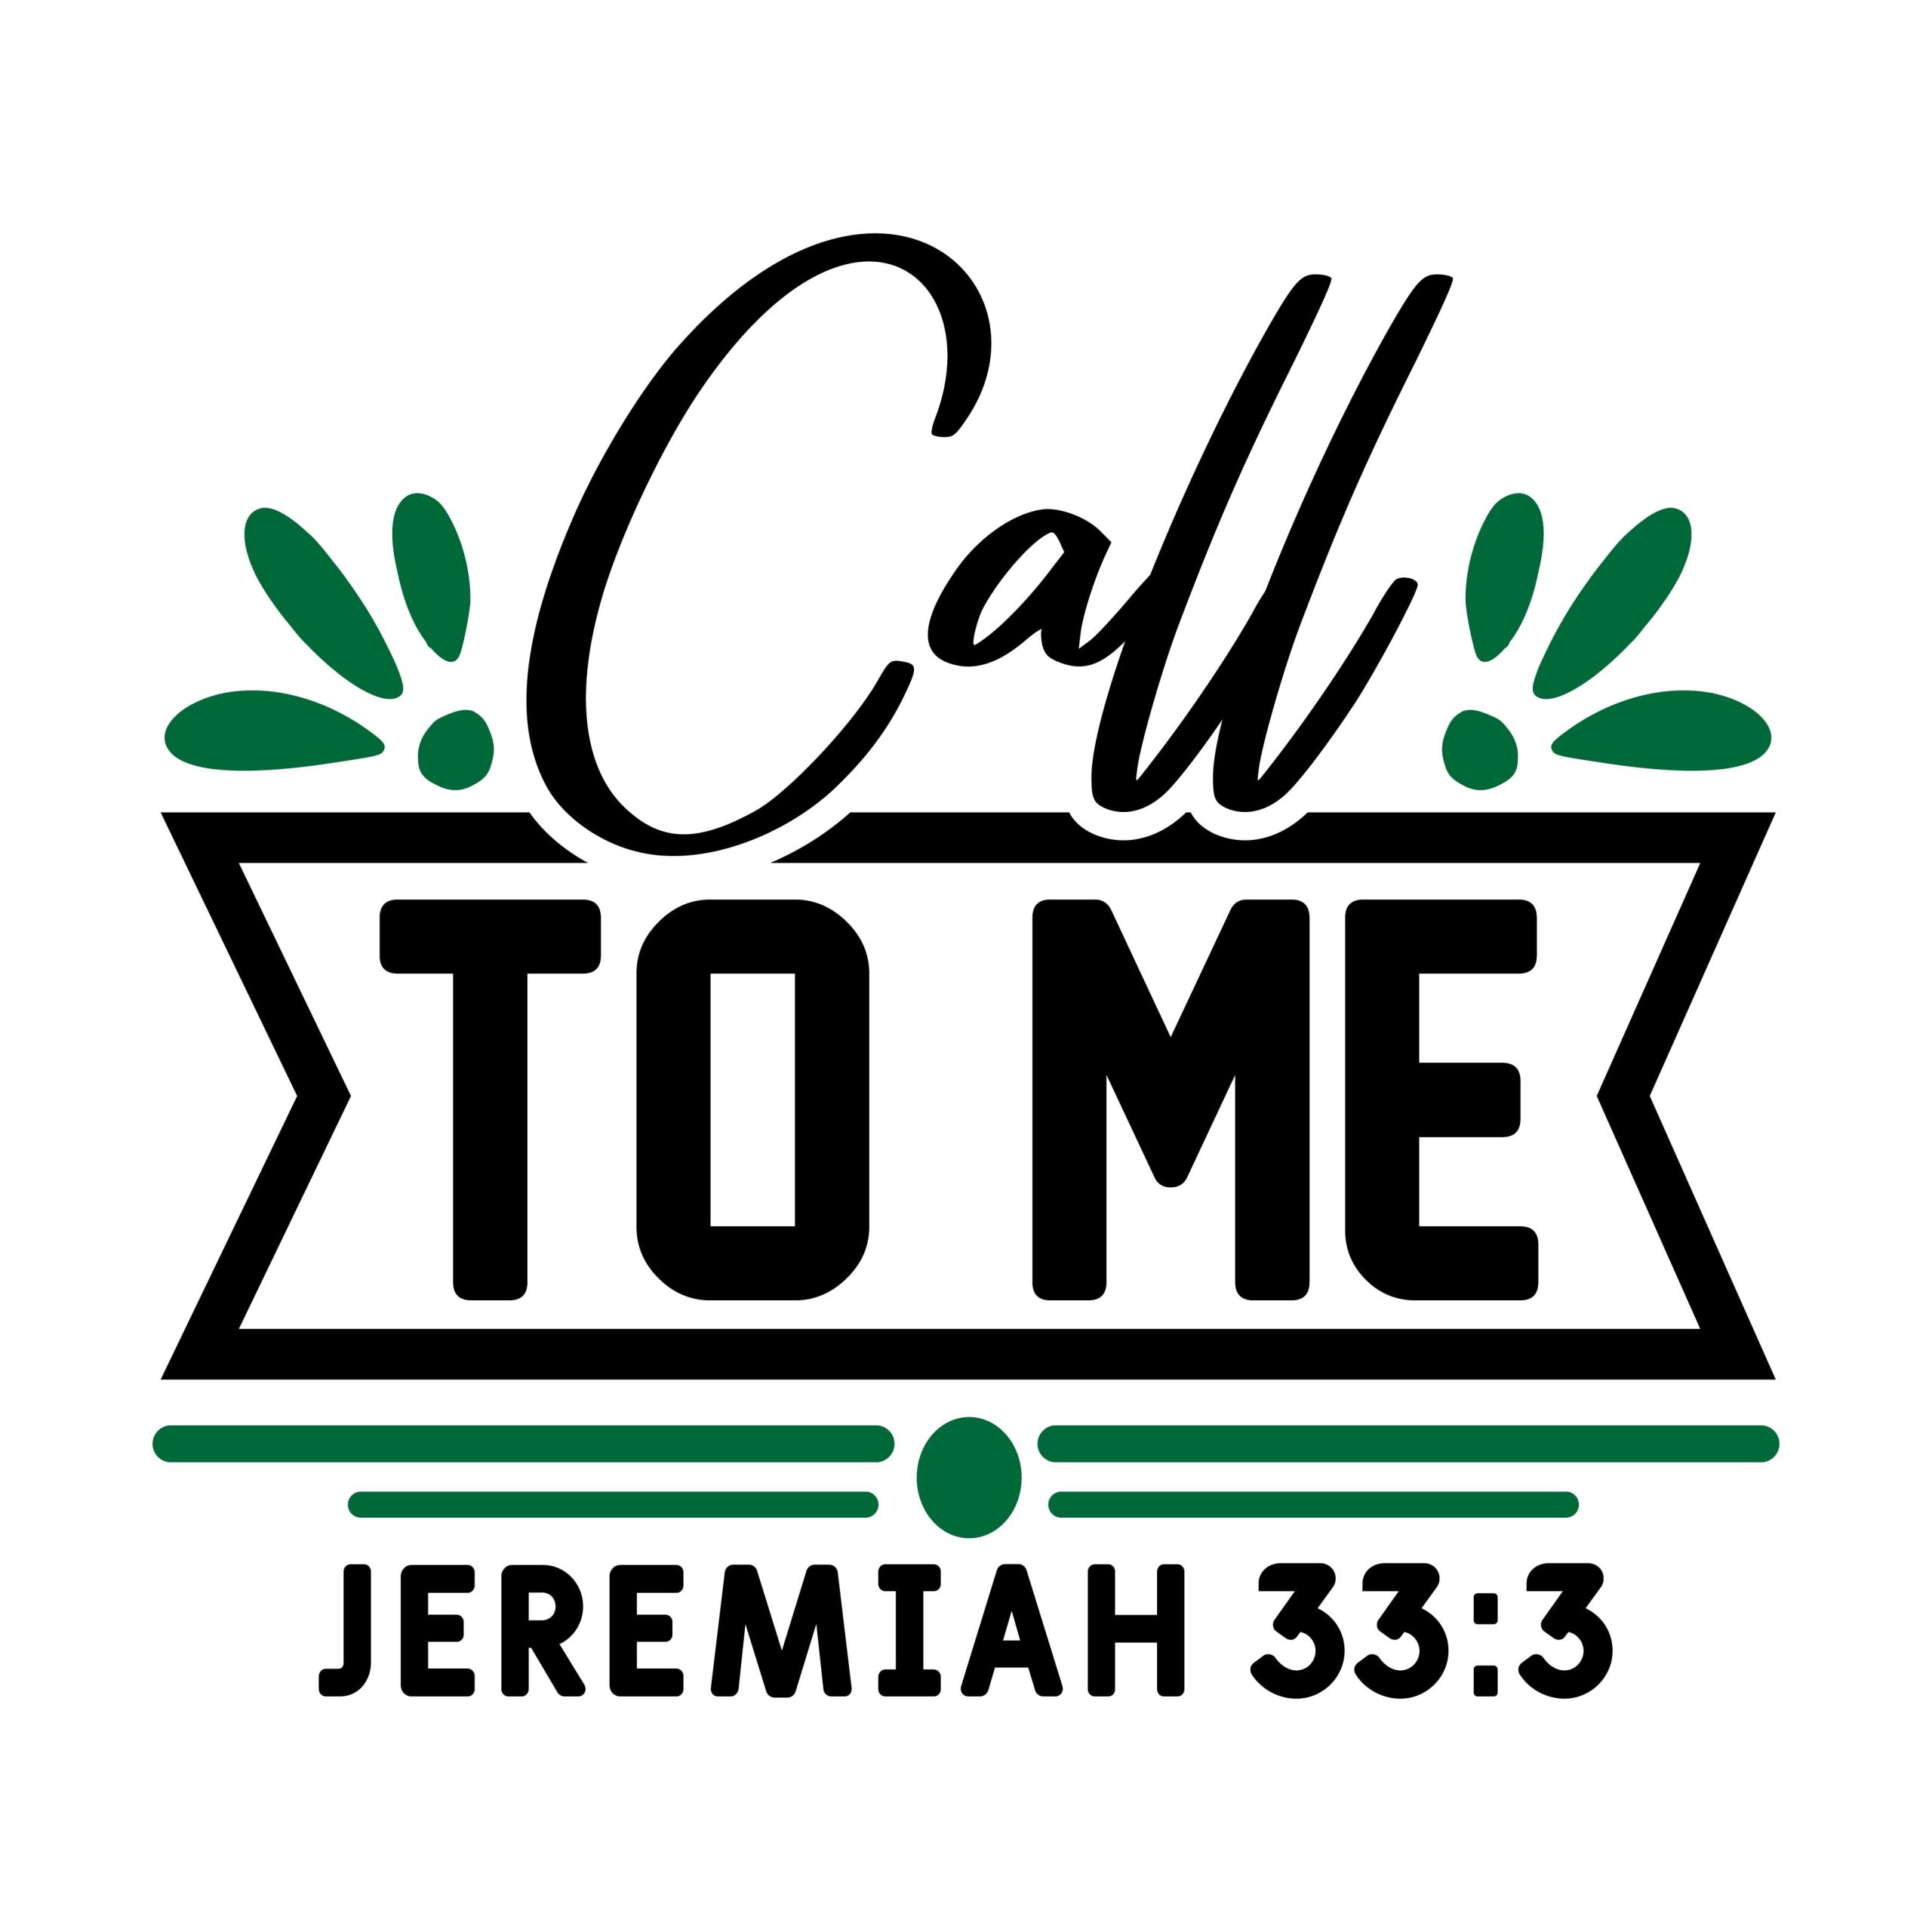 Call to me Jeremiah 33:3, bible verses, scripture verses, svg files, passages, sayings, cricut designs, silhouette, embroidery, bundle, free cut files, design space, vector